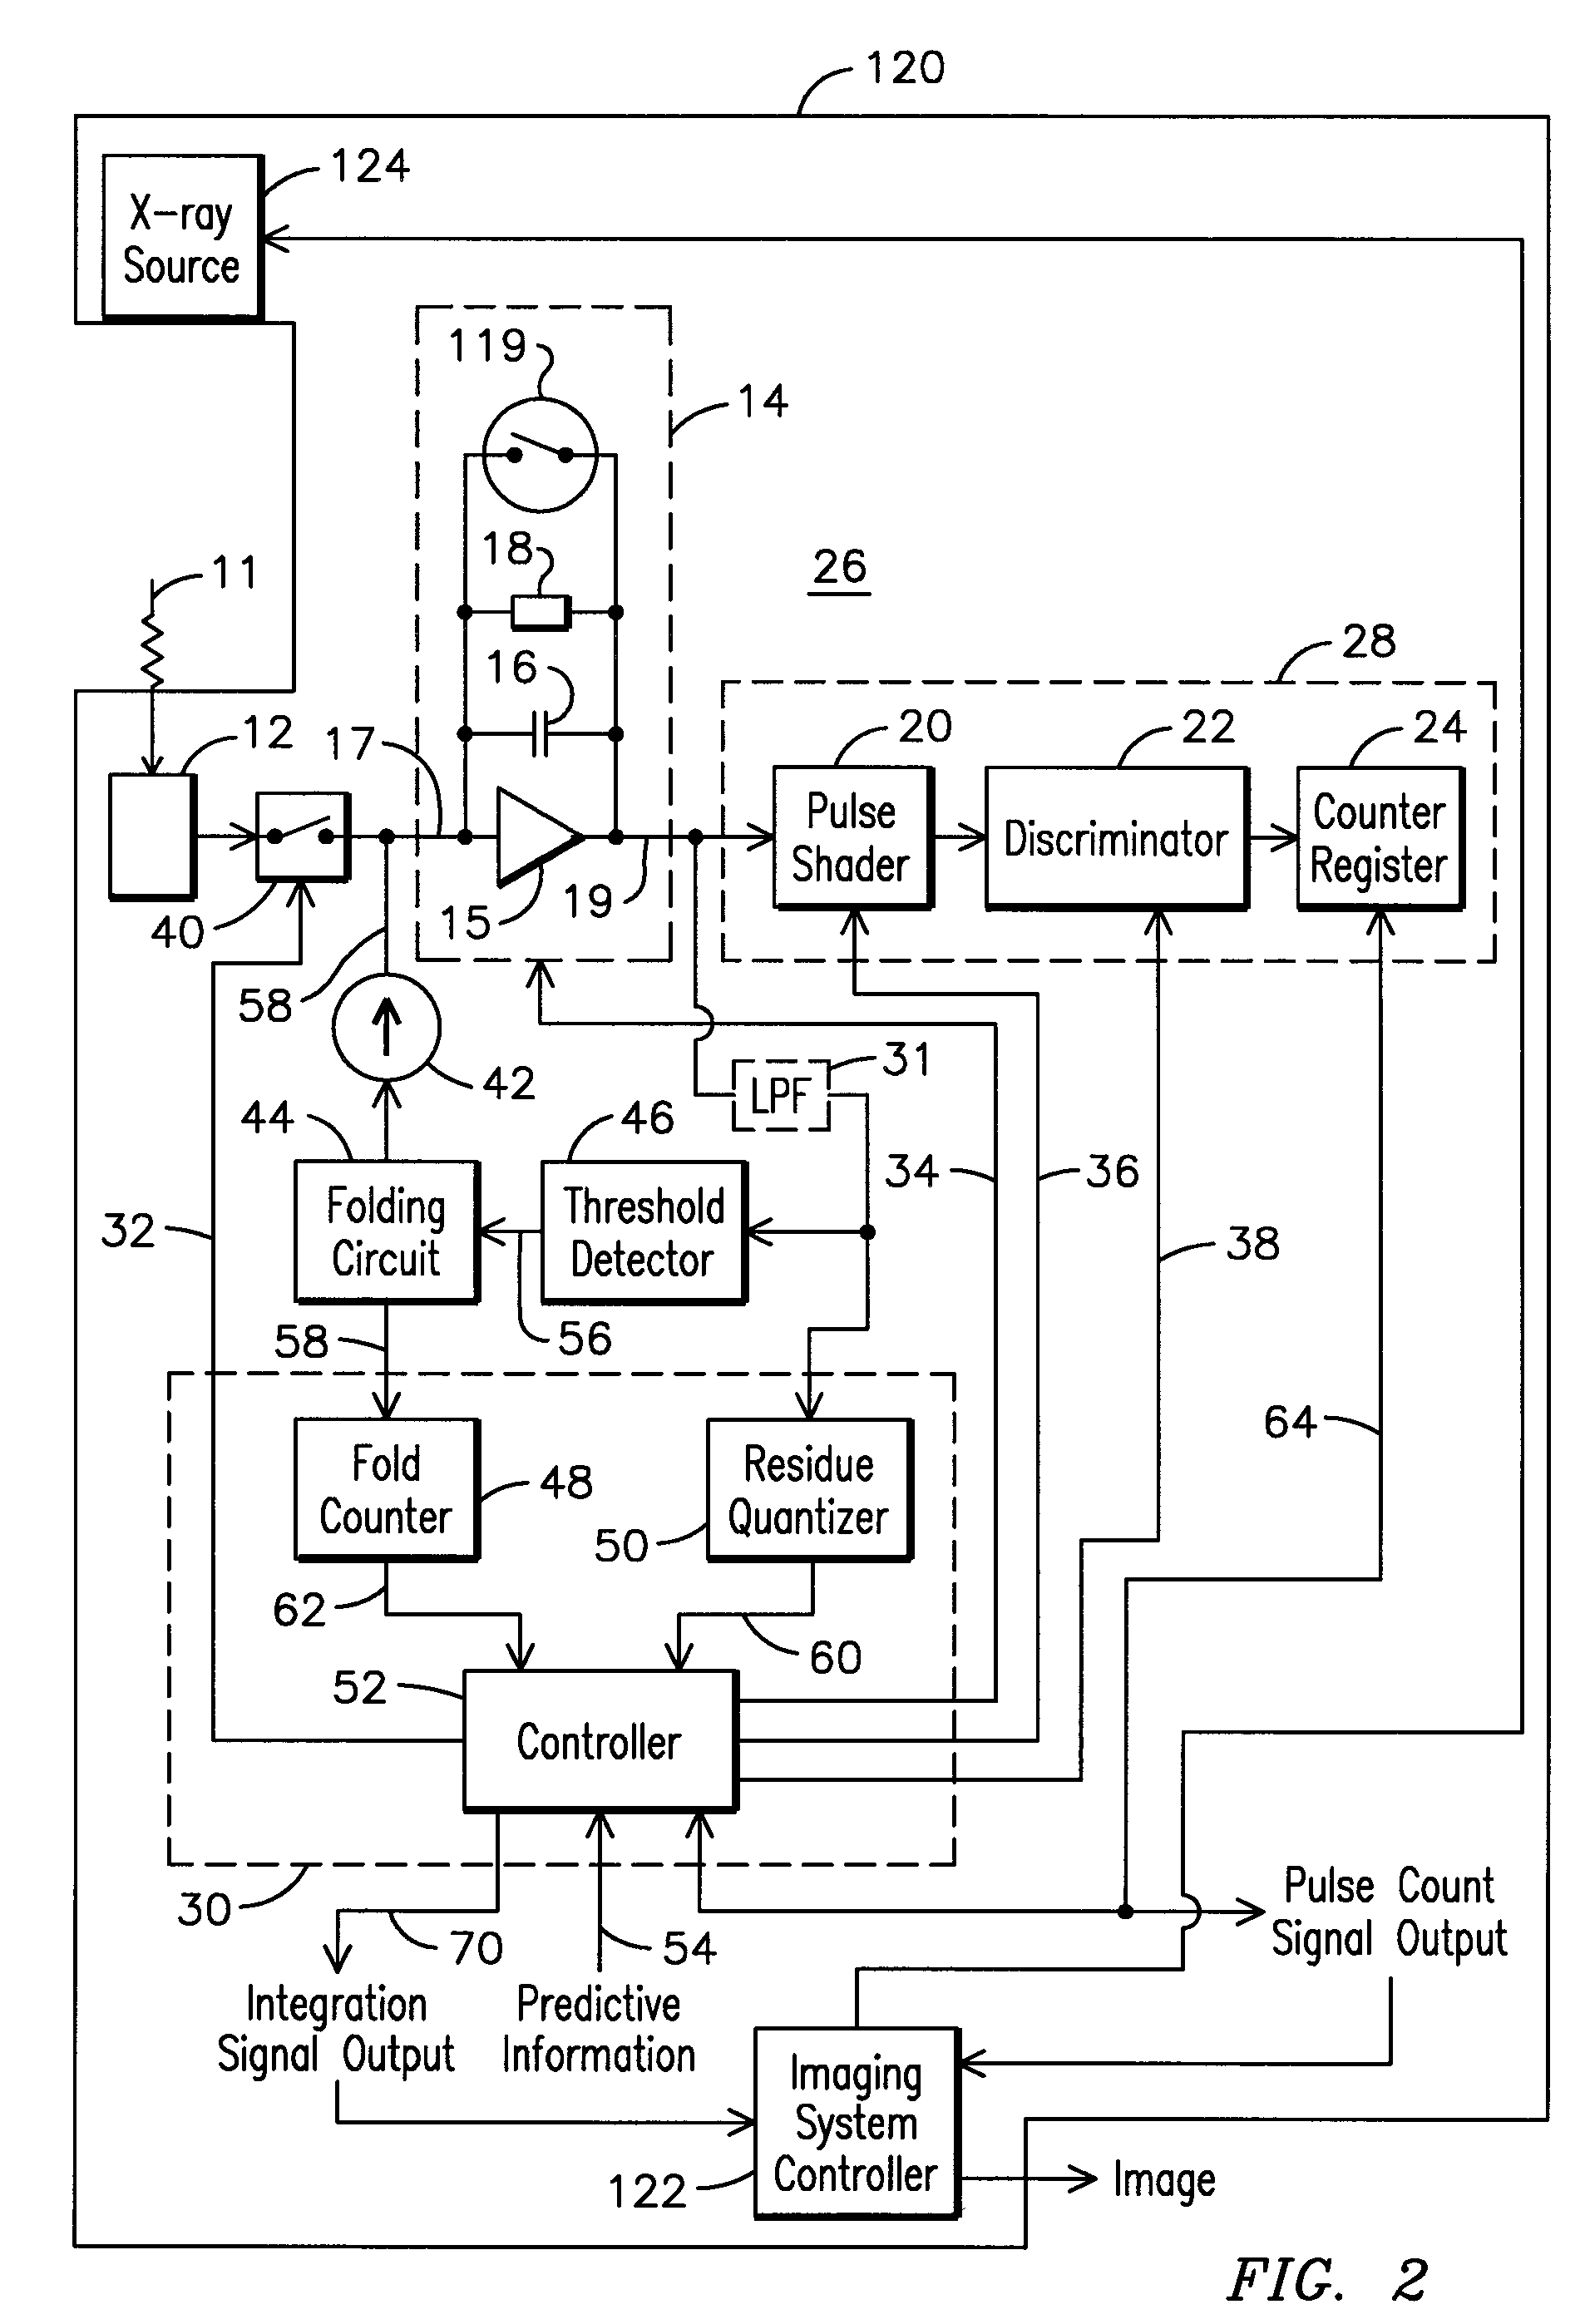 Adaptive data acquisition for an imaging system